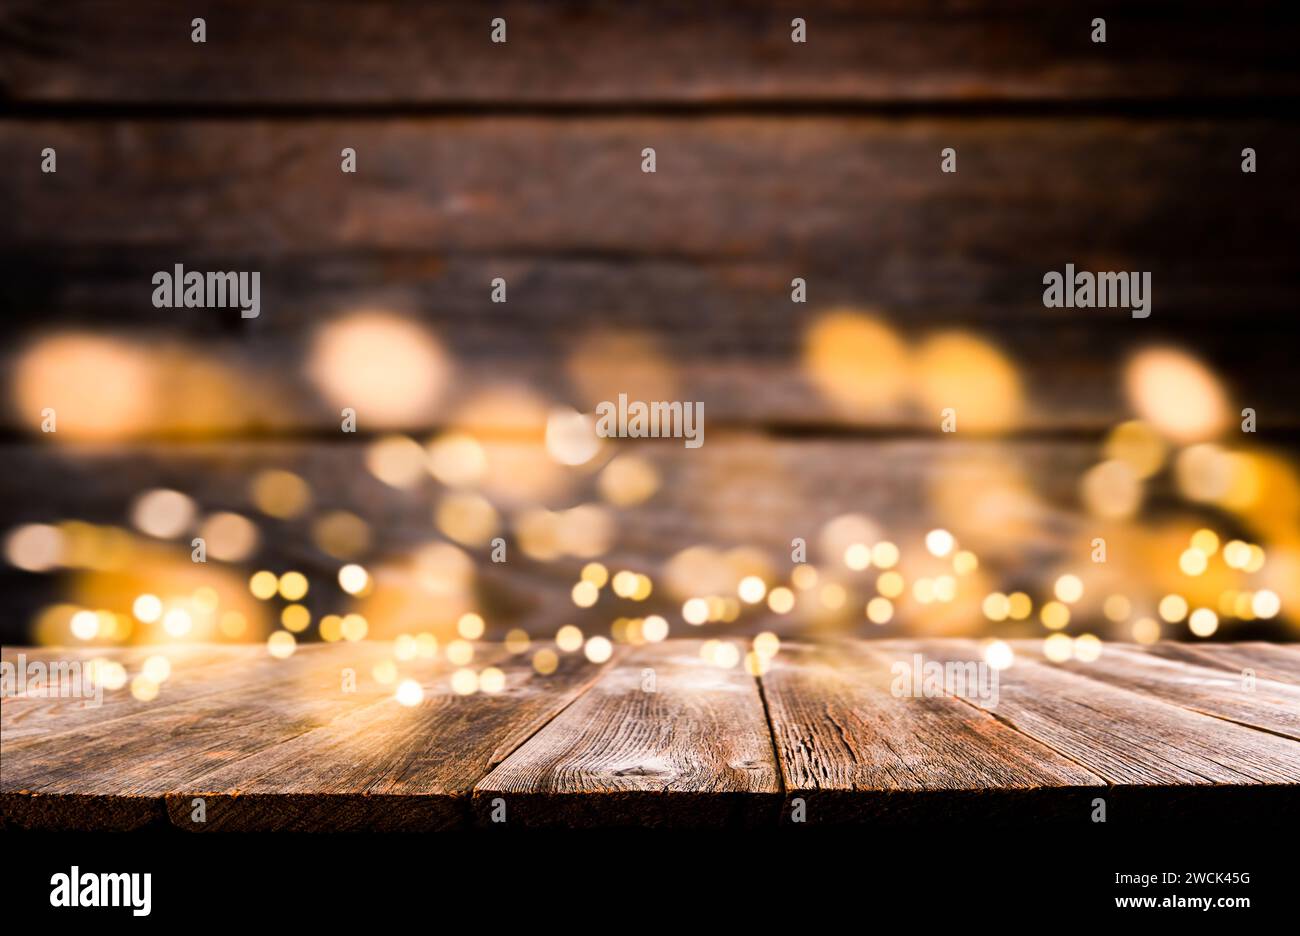 Empty rustic wooden table with blurred glitter lights background. Christmas lights on empty wooden table. Xmas holidays wallpaper. Stock Photo